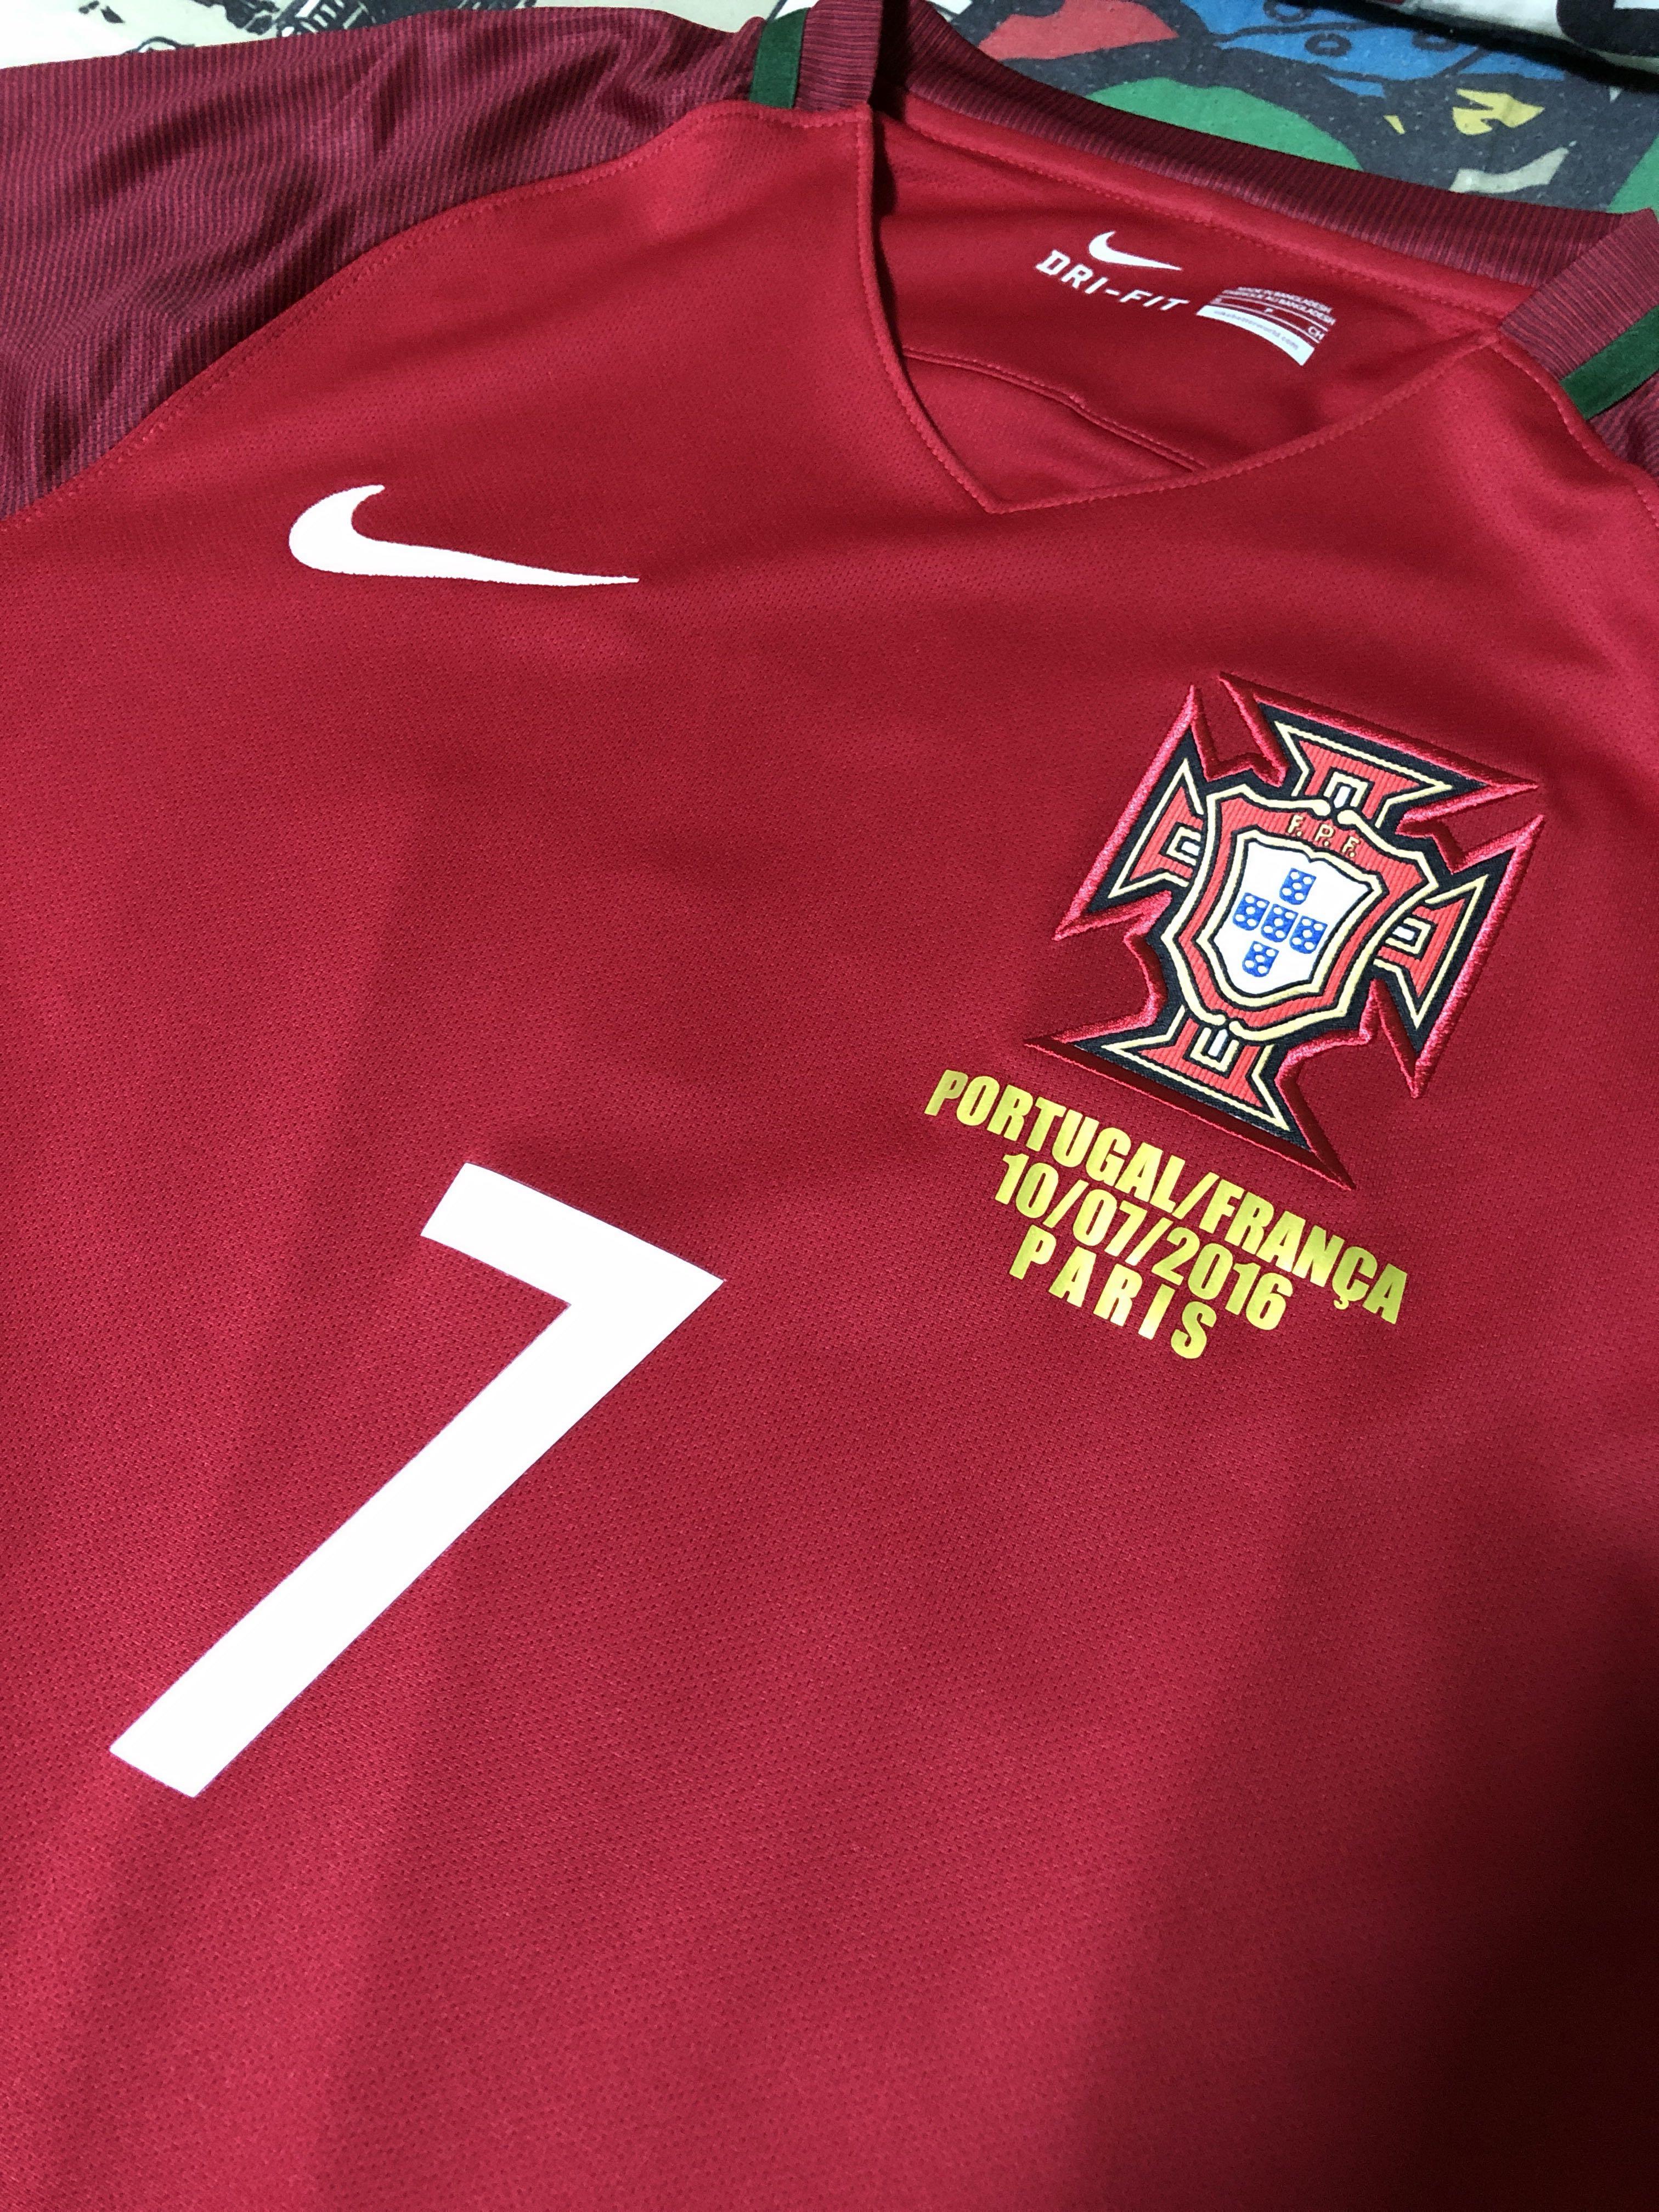 portugal euro 2016 jersey